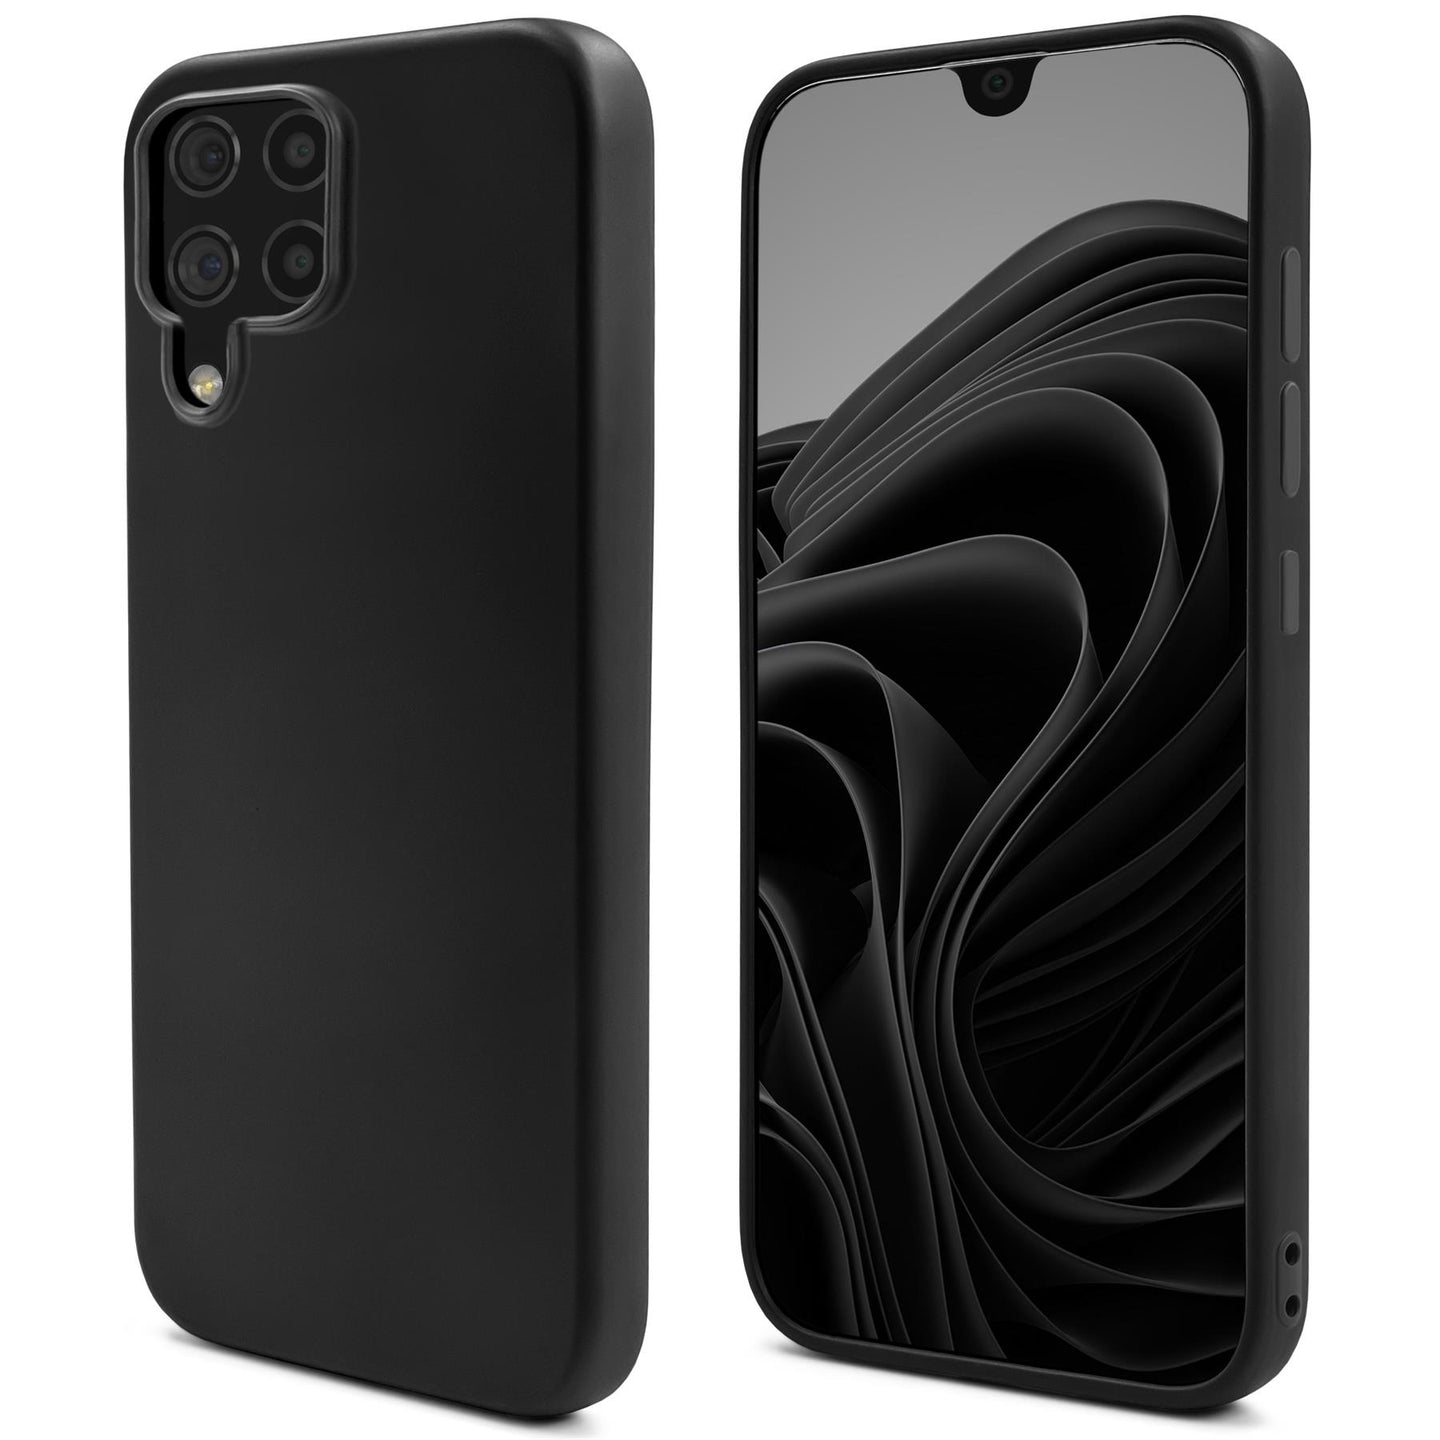 Moozy Lifestyle. Silicone Case for Samsung A22 4G, Black - Liquid Silicone Lightweight Cover with Matte Finish and Soft Microfiber Lining, Premium Silicone Case